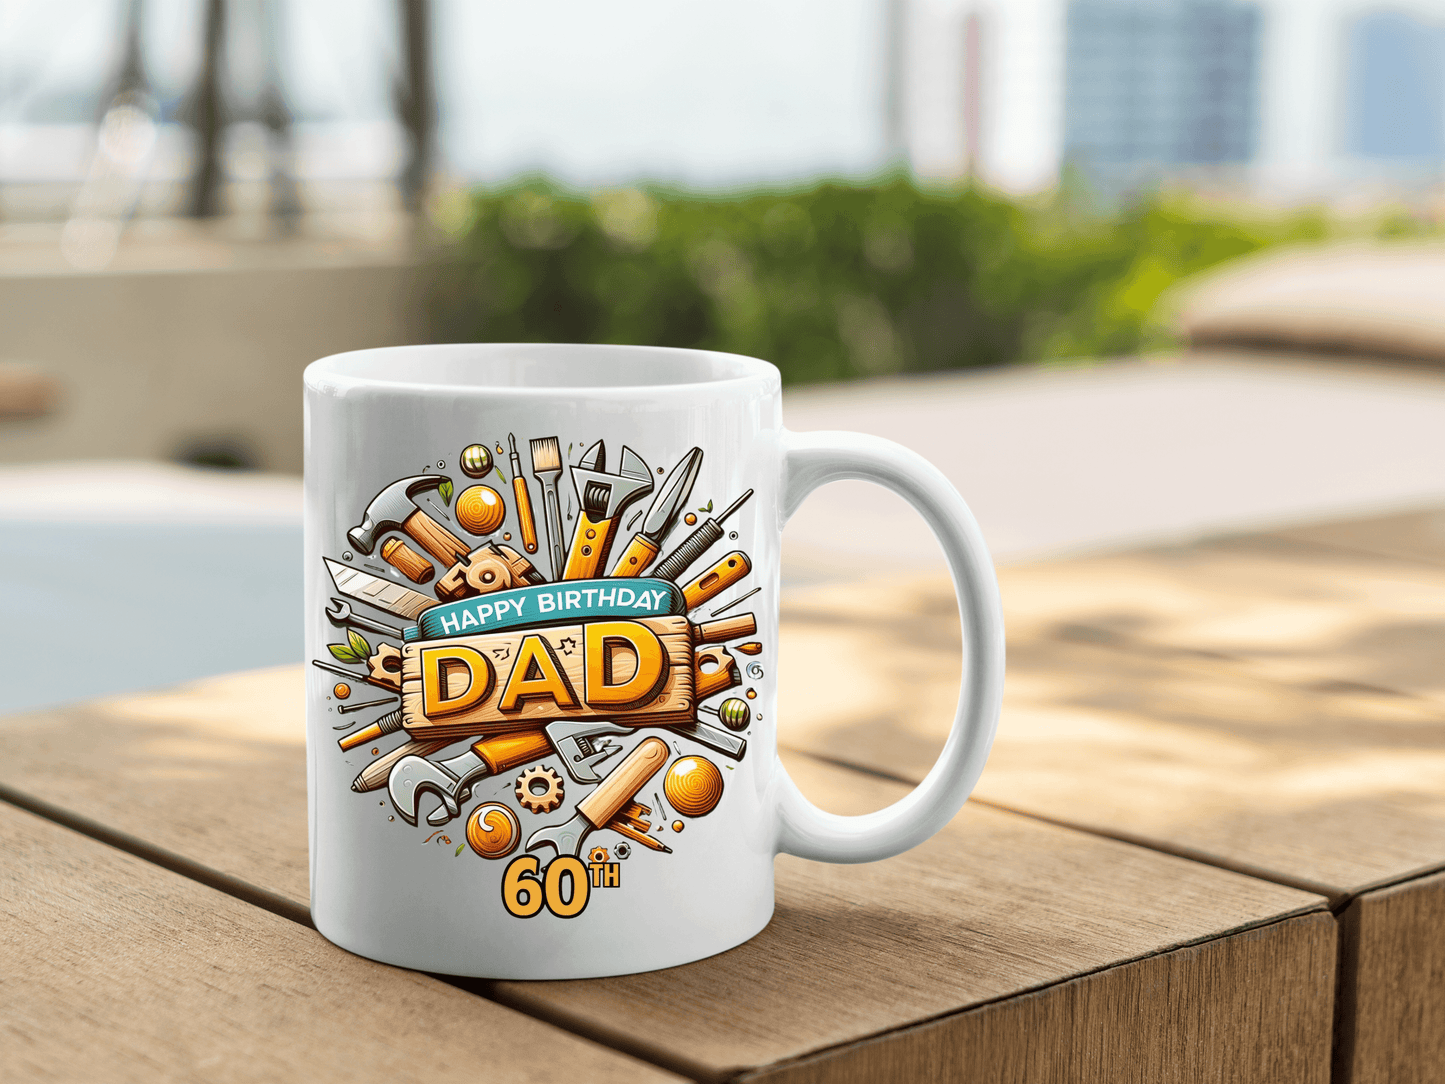 Happy Birthday Dad Mug, Construction Worker Coffee Cup, Father Teacup, Carpenter Coffee Mug Gift, Personalized Age